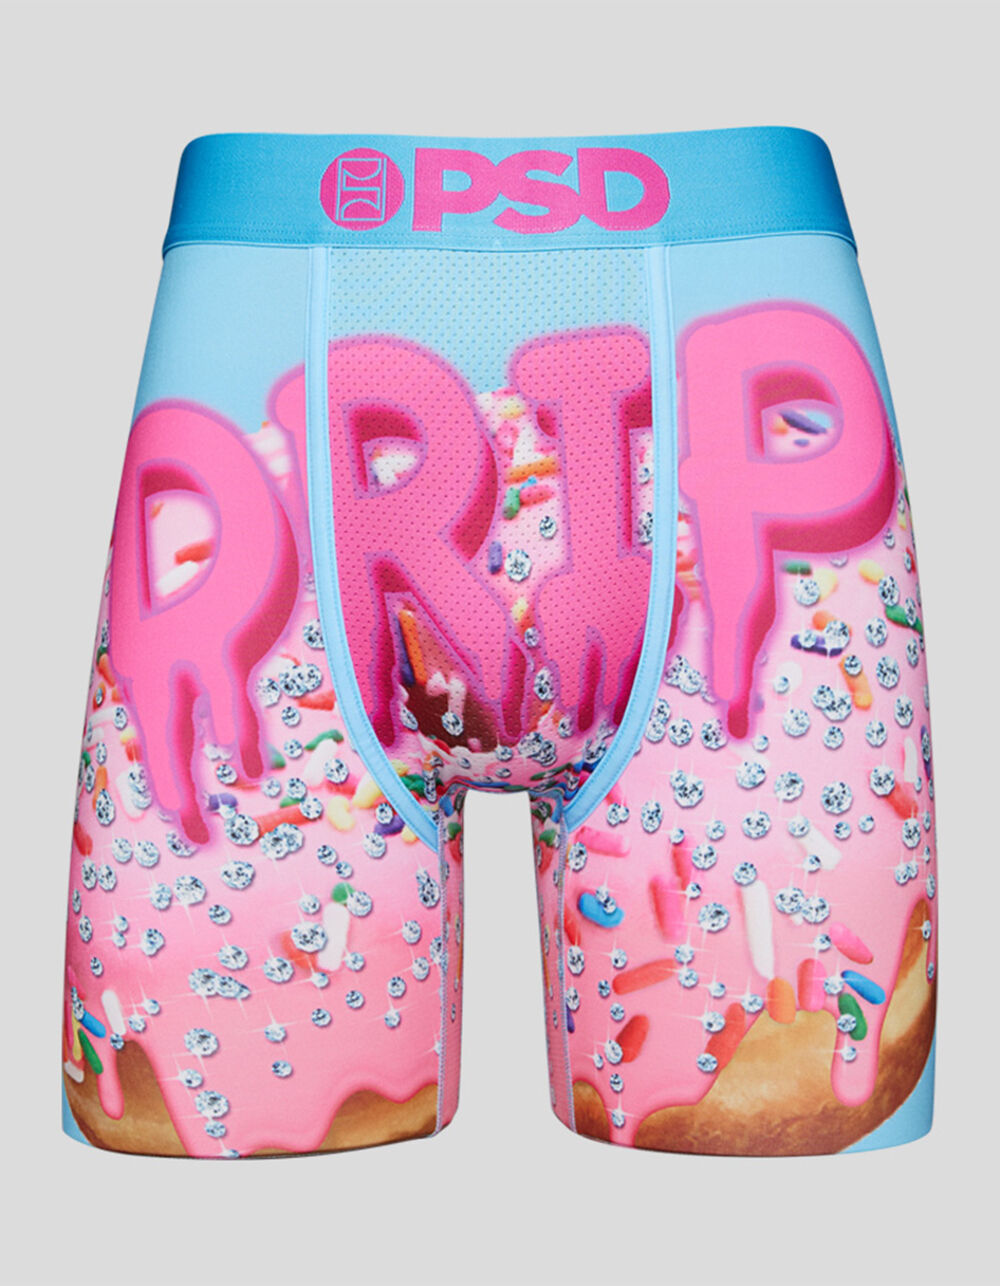 PSD Underwear on X: 🚨New Drop🚨 We've partnered with The, psd 